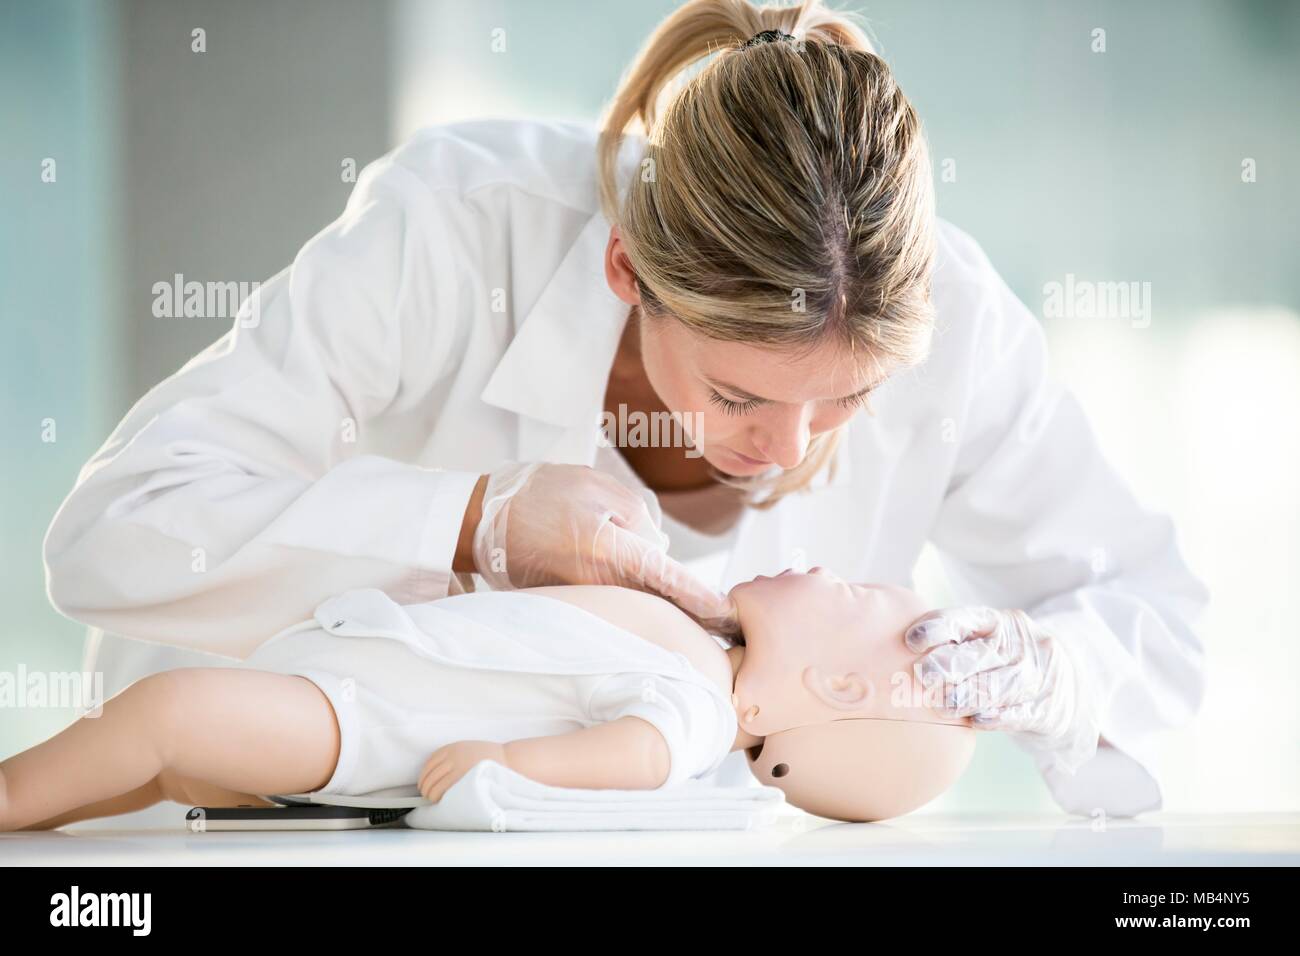 Doctor practising infant CPR on training dummies. Stock Photo